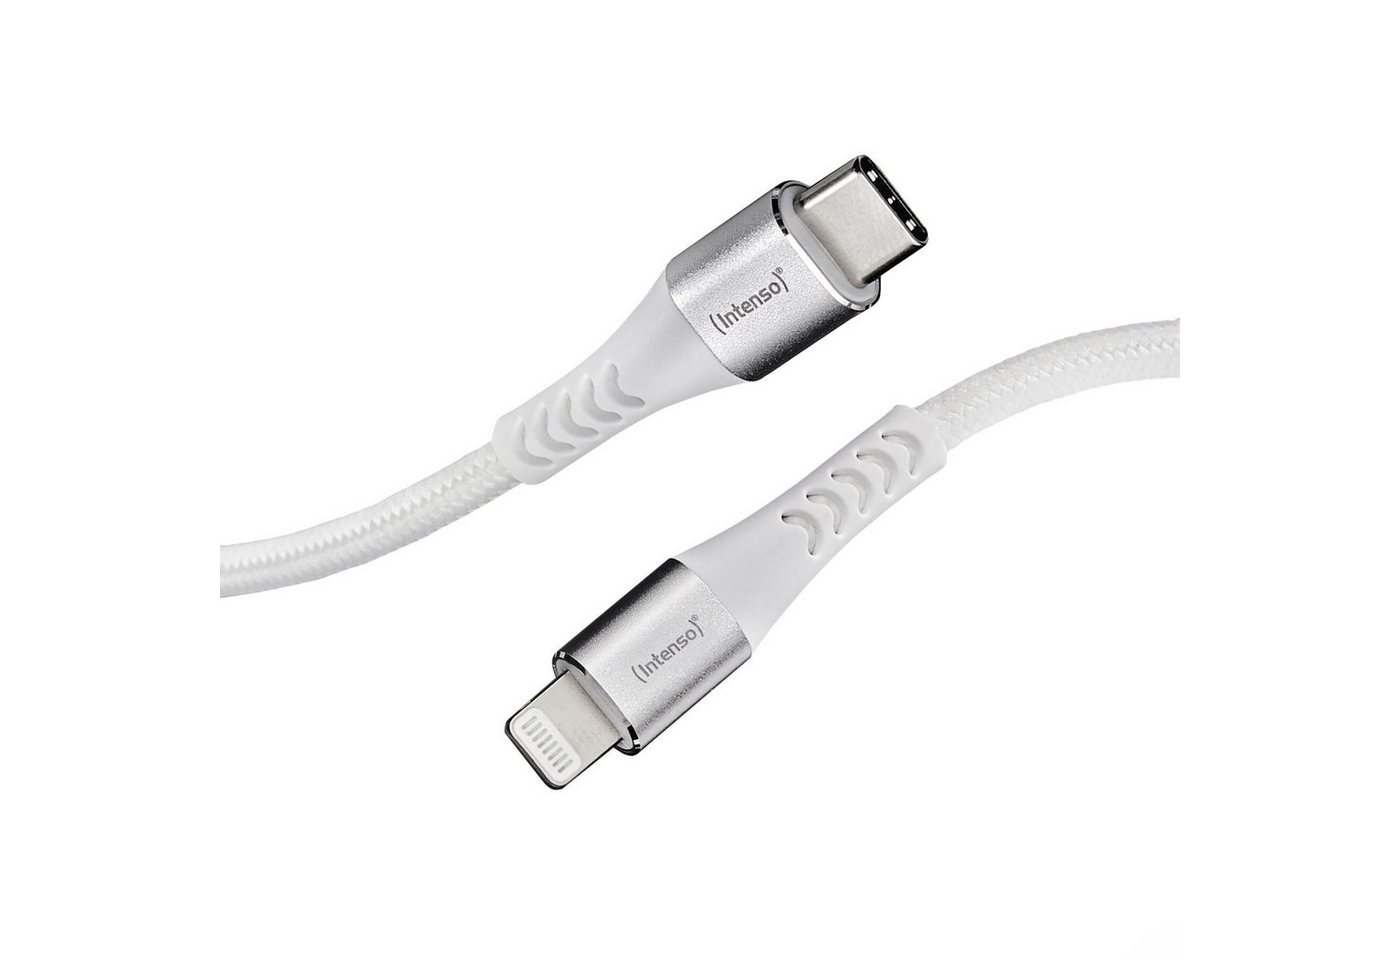 Intenso CABLE USB-C TO LIGHTNING 1.5M/7902002 USB-Kabel von Intenso